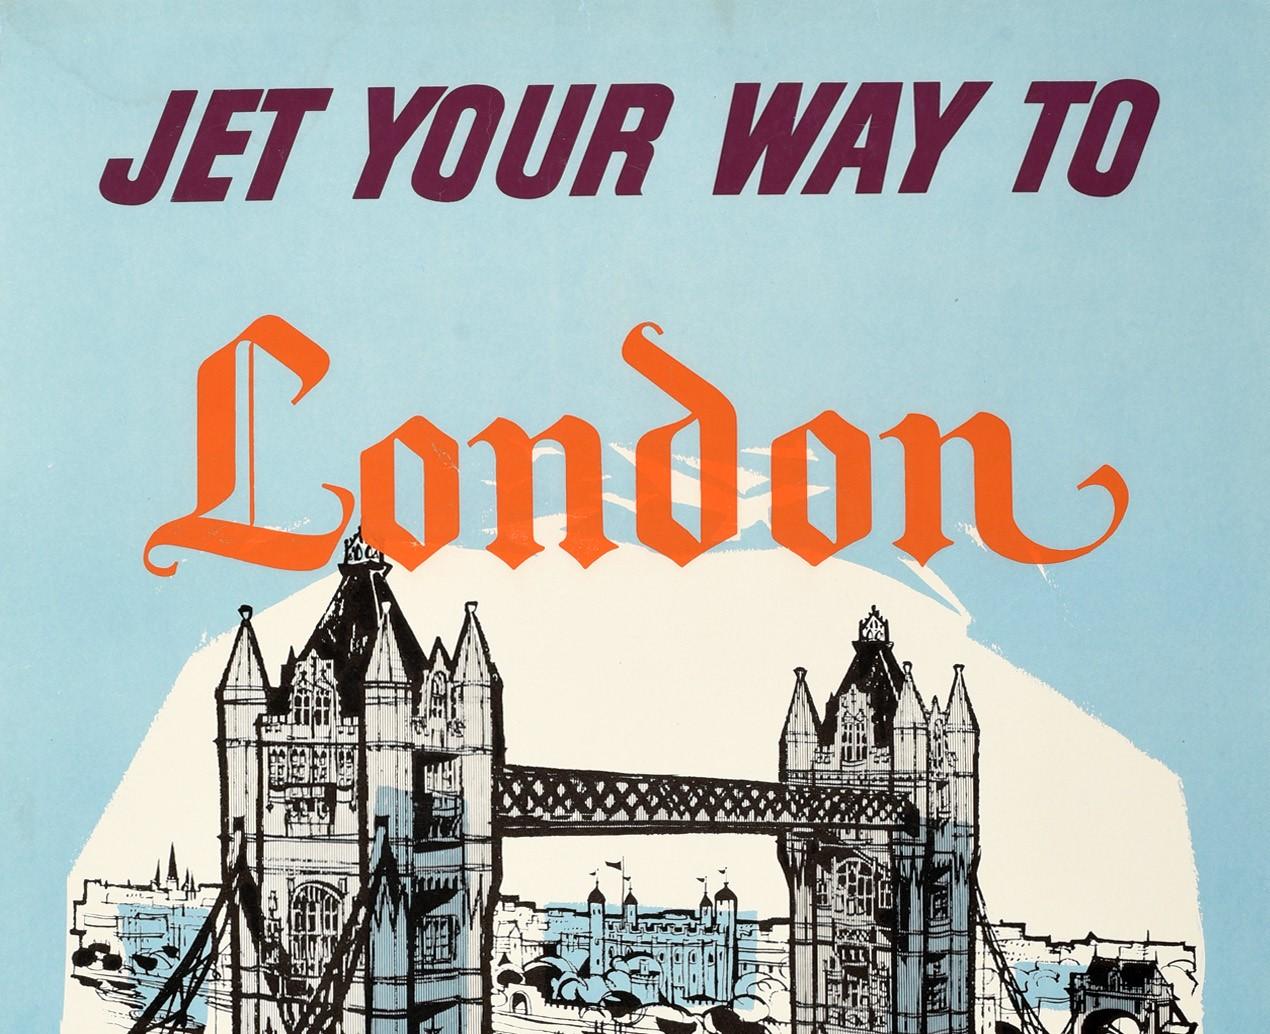 Original vintage travel poster - Jet Your Way to London by BOAC First Around the World with Jets - featuring a great illustration of Tower Bridge in front of the historic Tower of London and city with boats on the River Thames and cars driving over